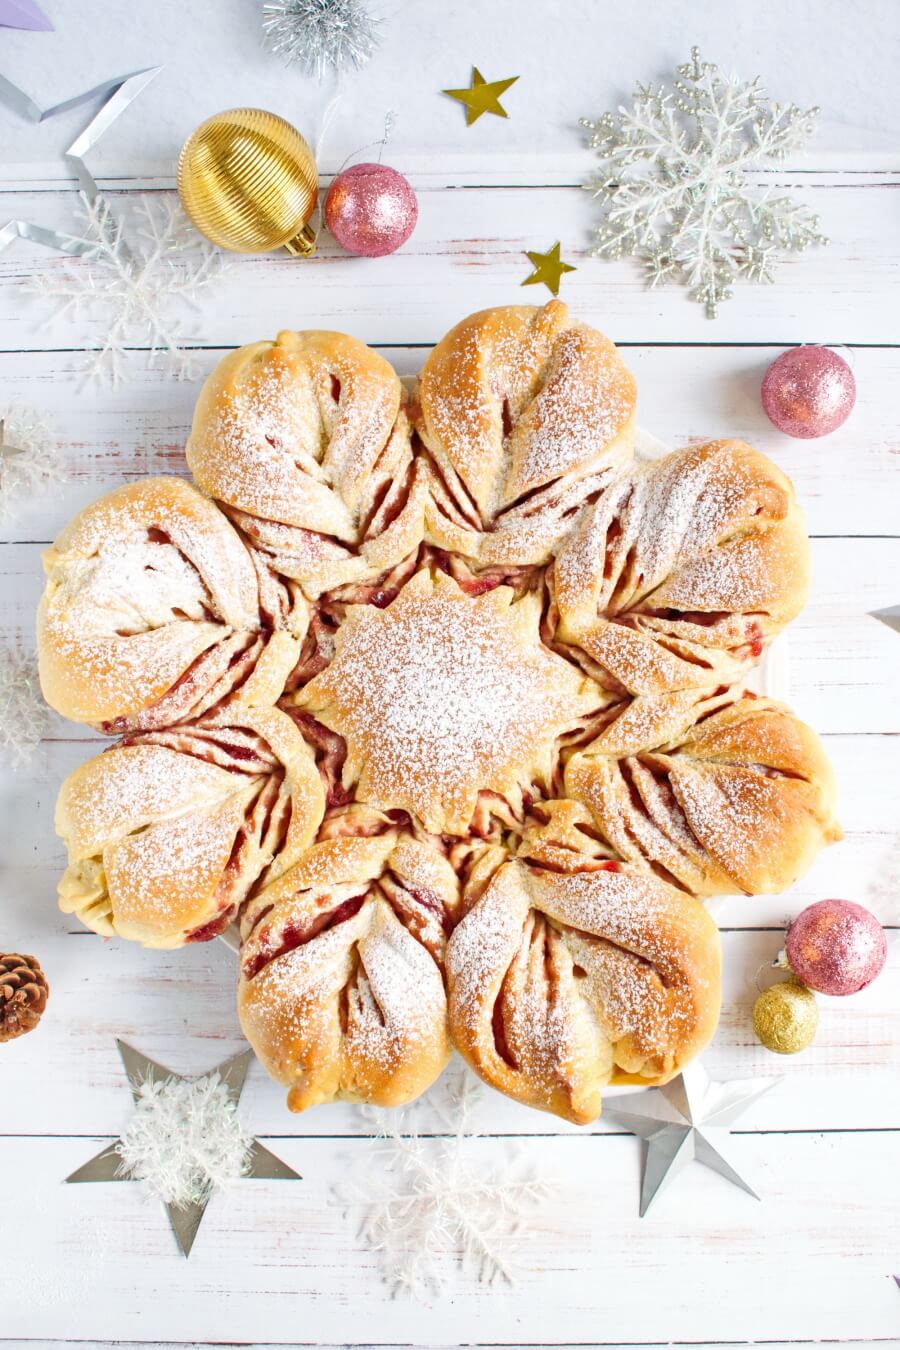 Christmas Bread Recipe: How to Make It